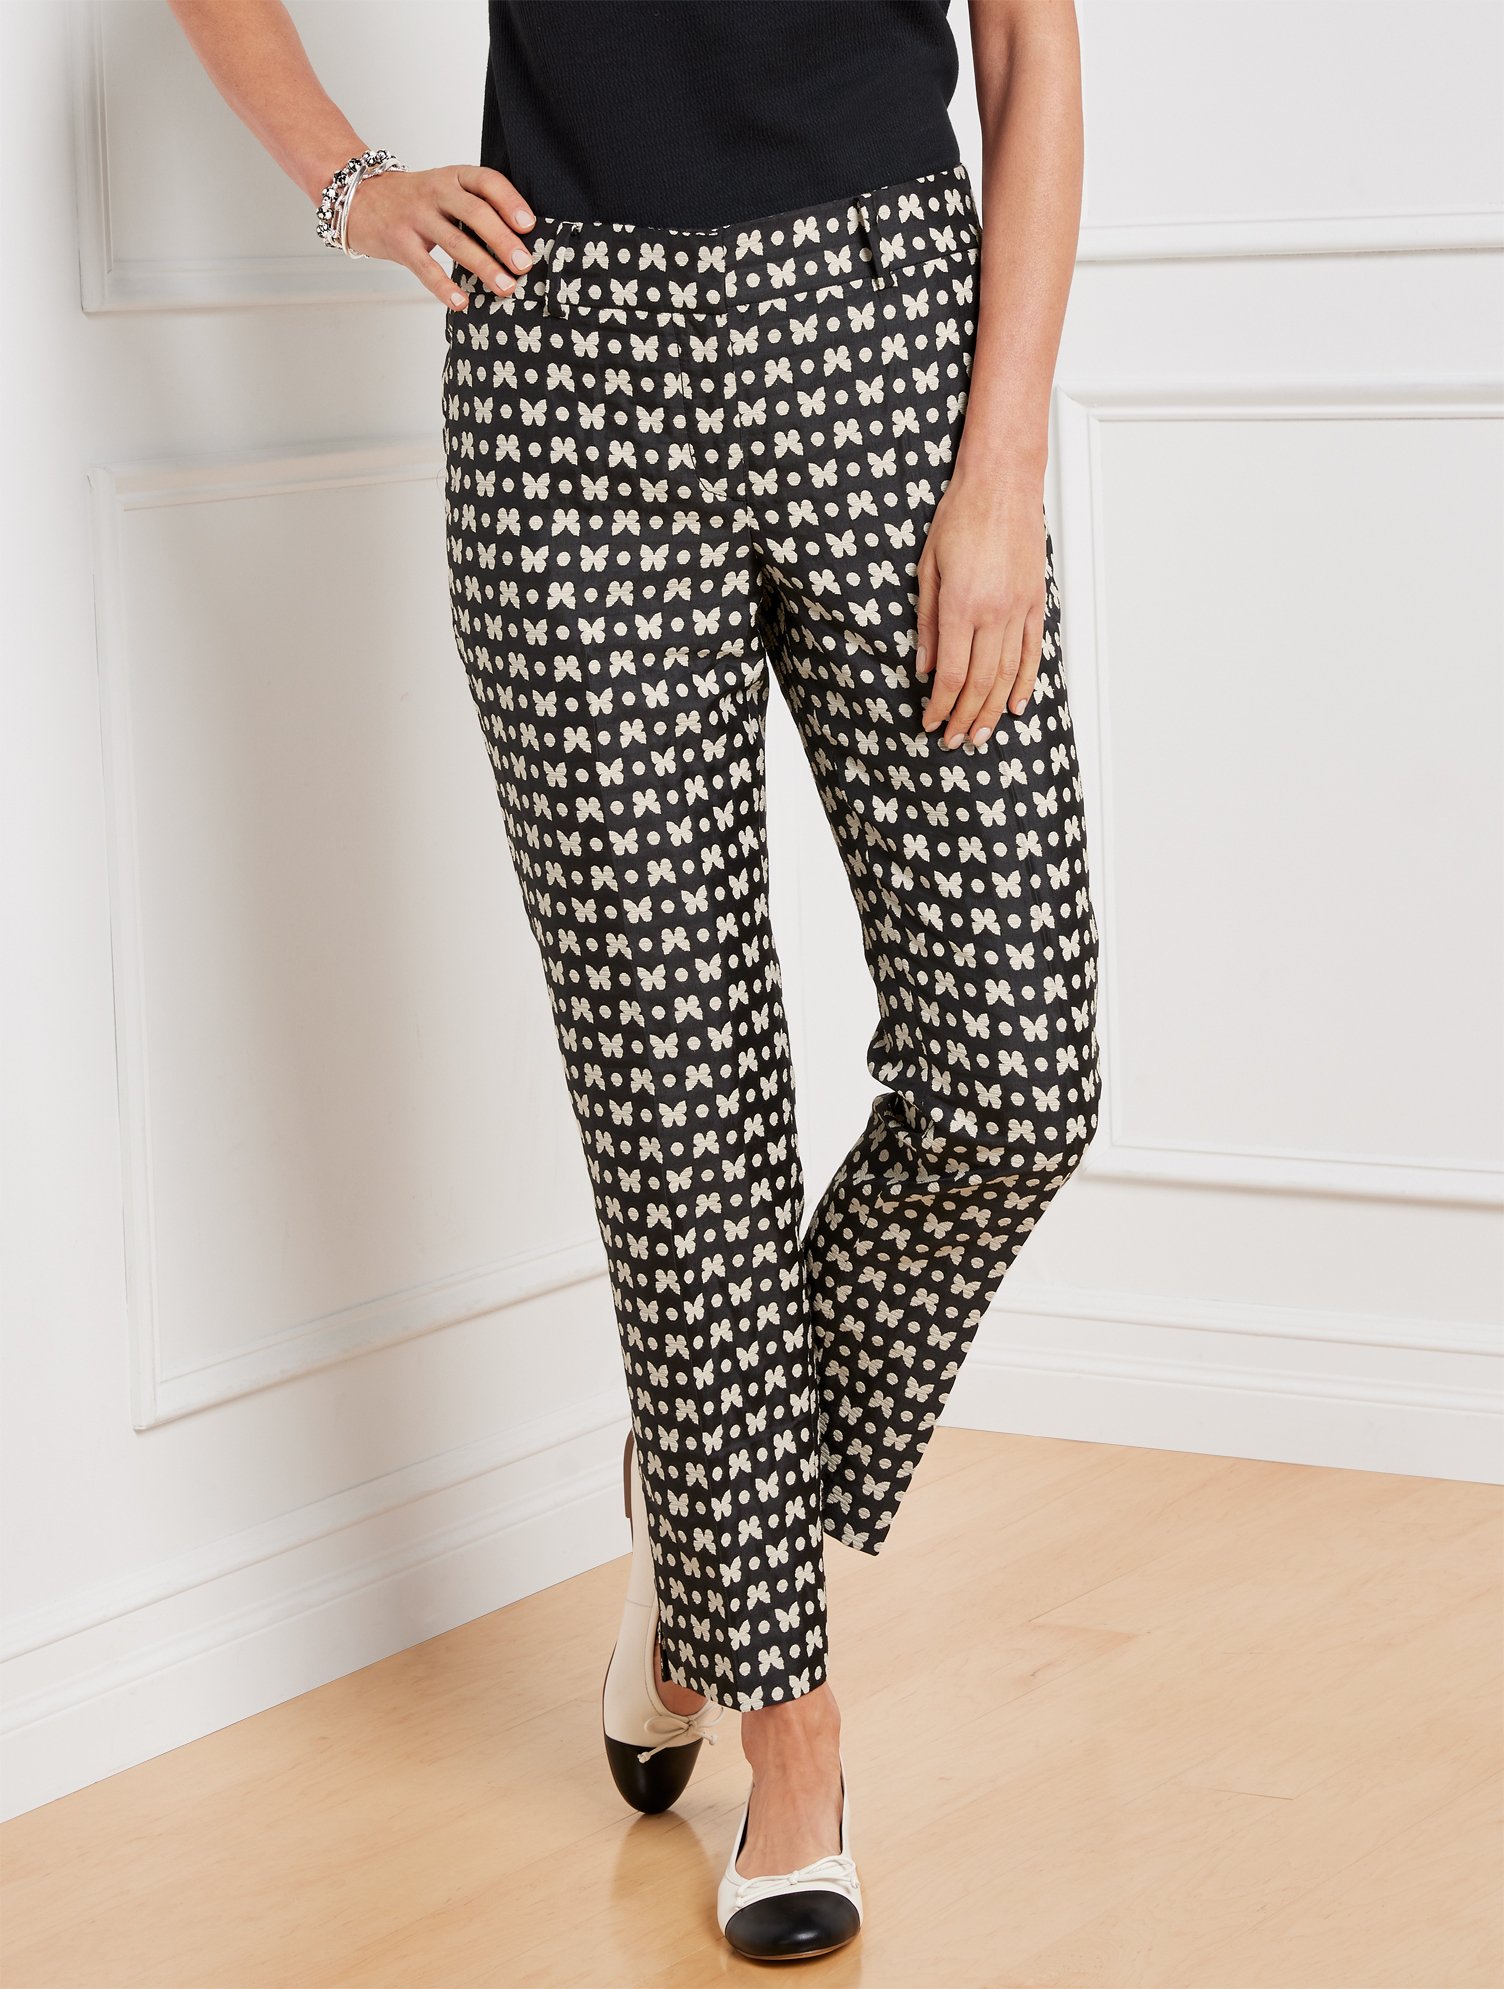 Talbots Hampshire Ankle Pants - Sequin Tweed